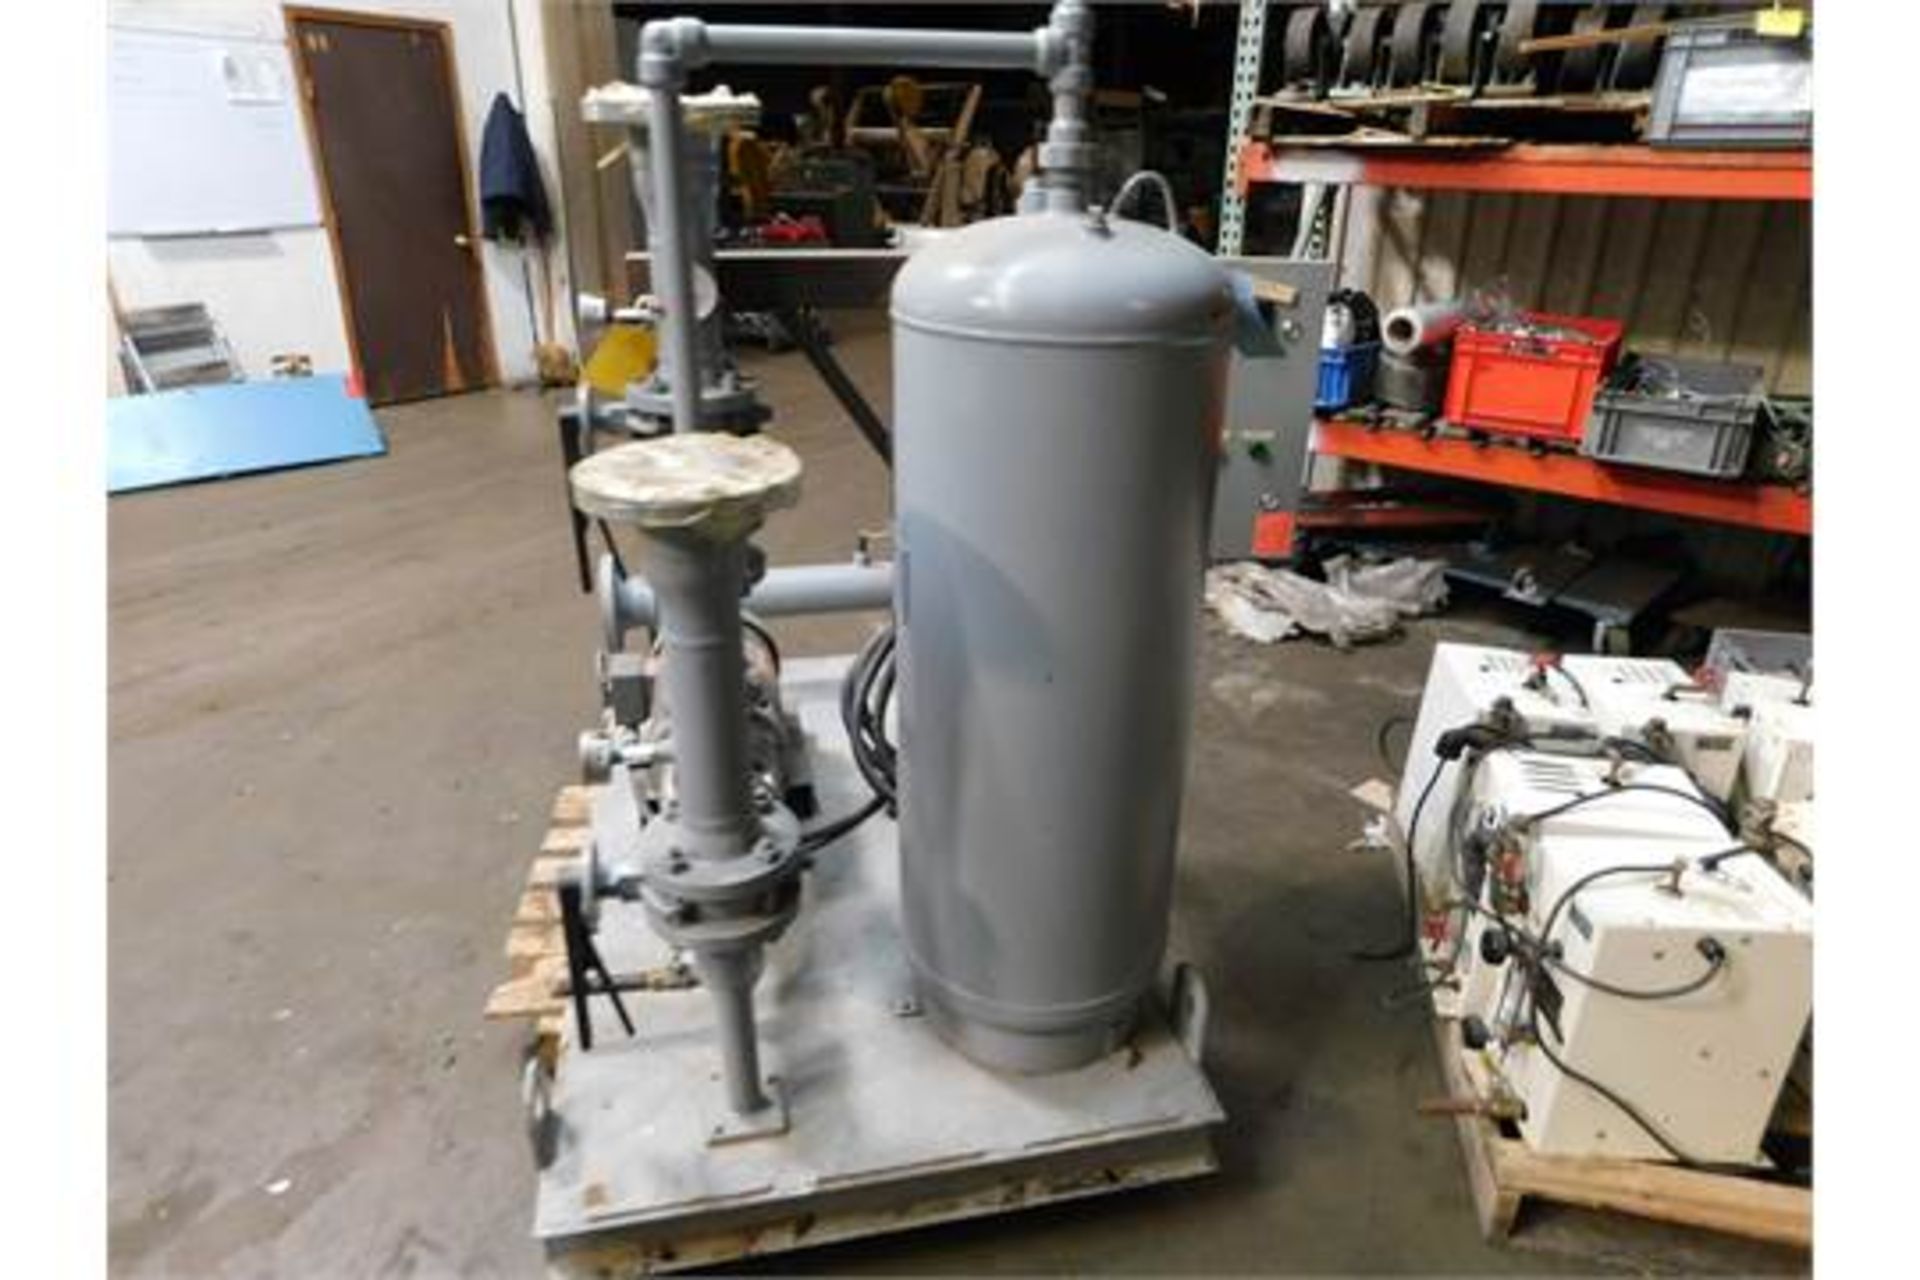 Goulds AC Pump, 15 Hp, 3450 Rpm, 575 volts, Controls included, Never been Used, Excellent Condition, - Image 2 of 4